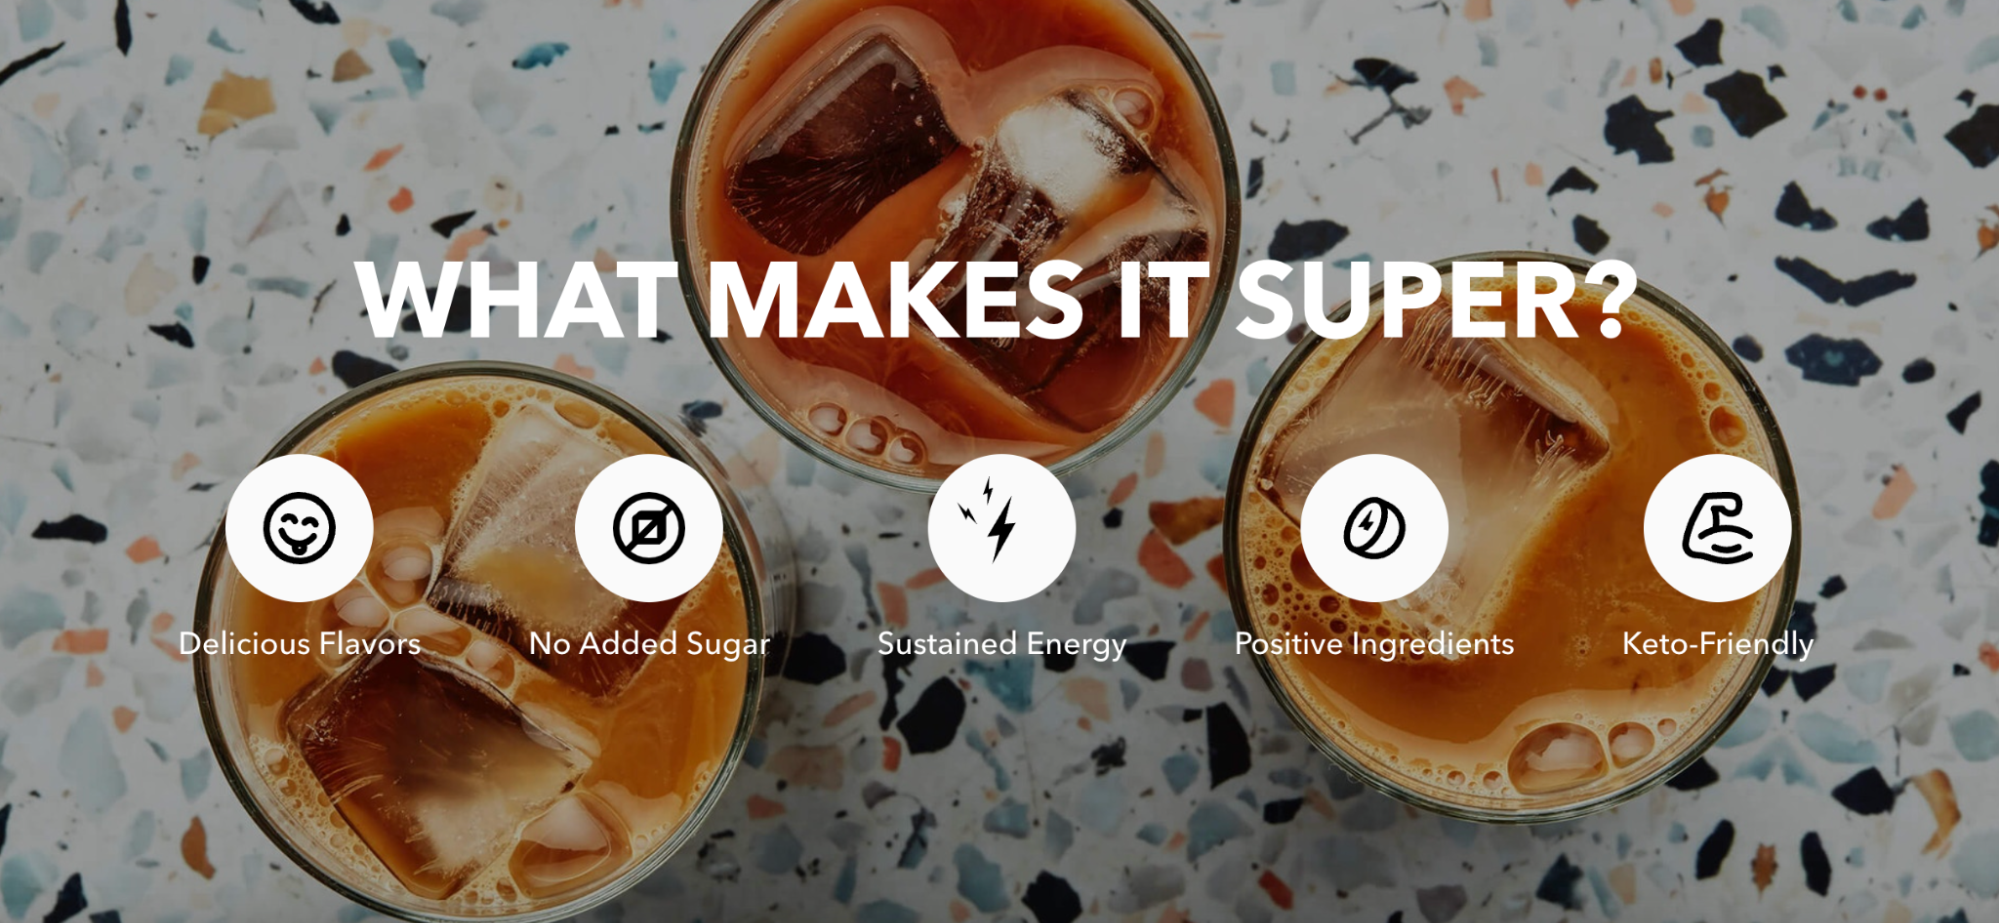 Three iced coffees are shown with text saying 